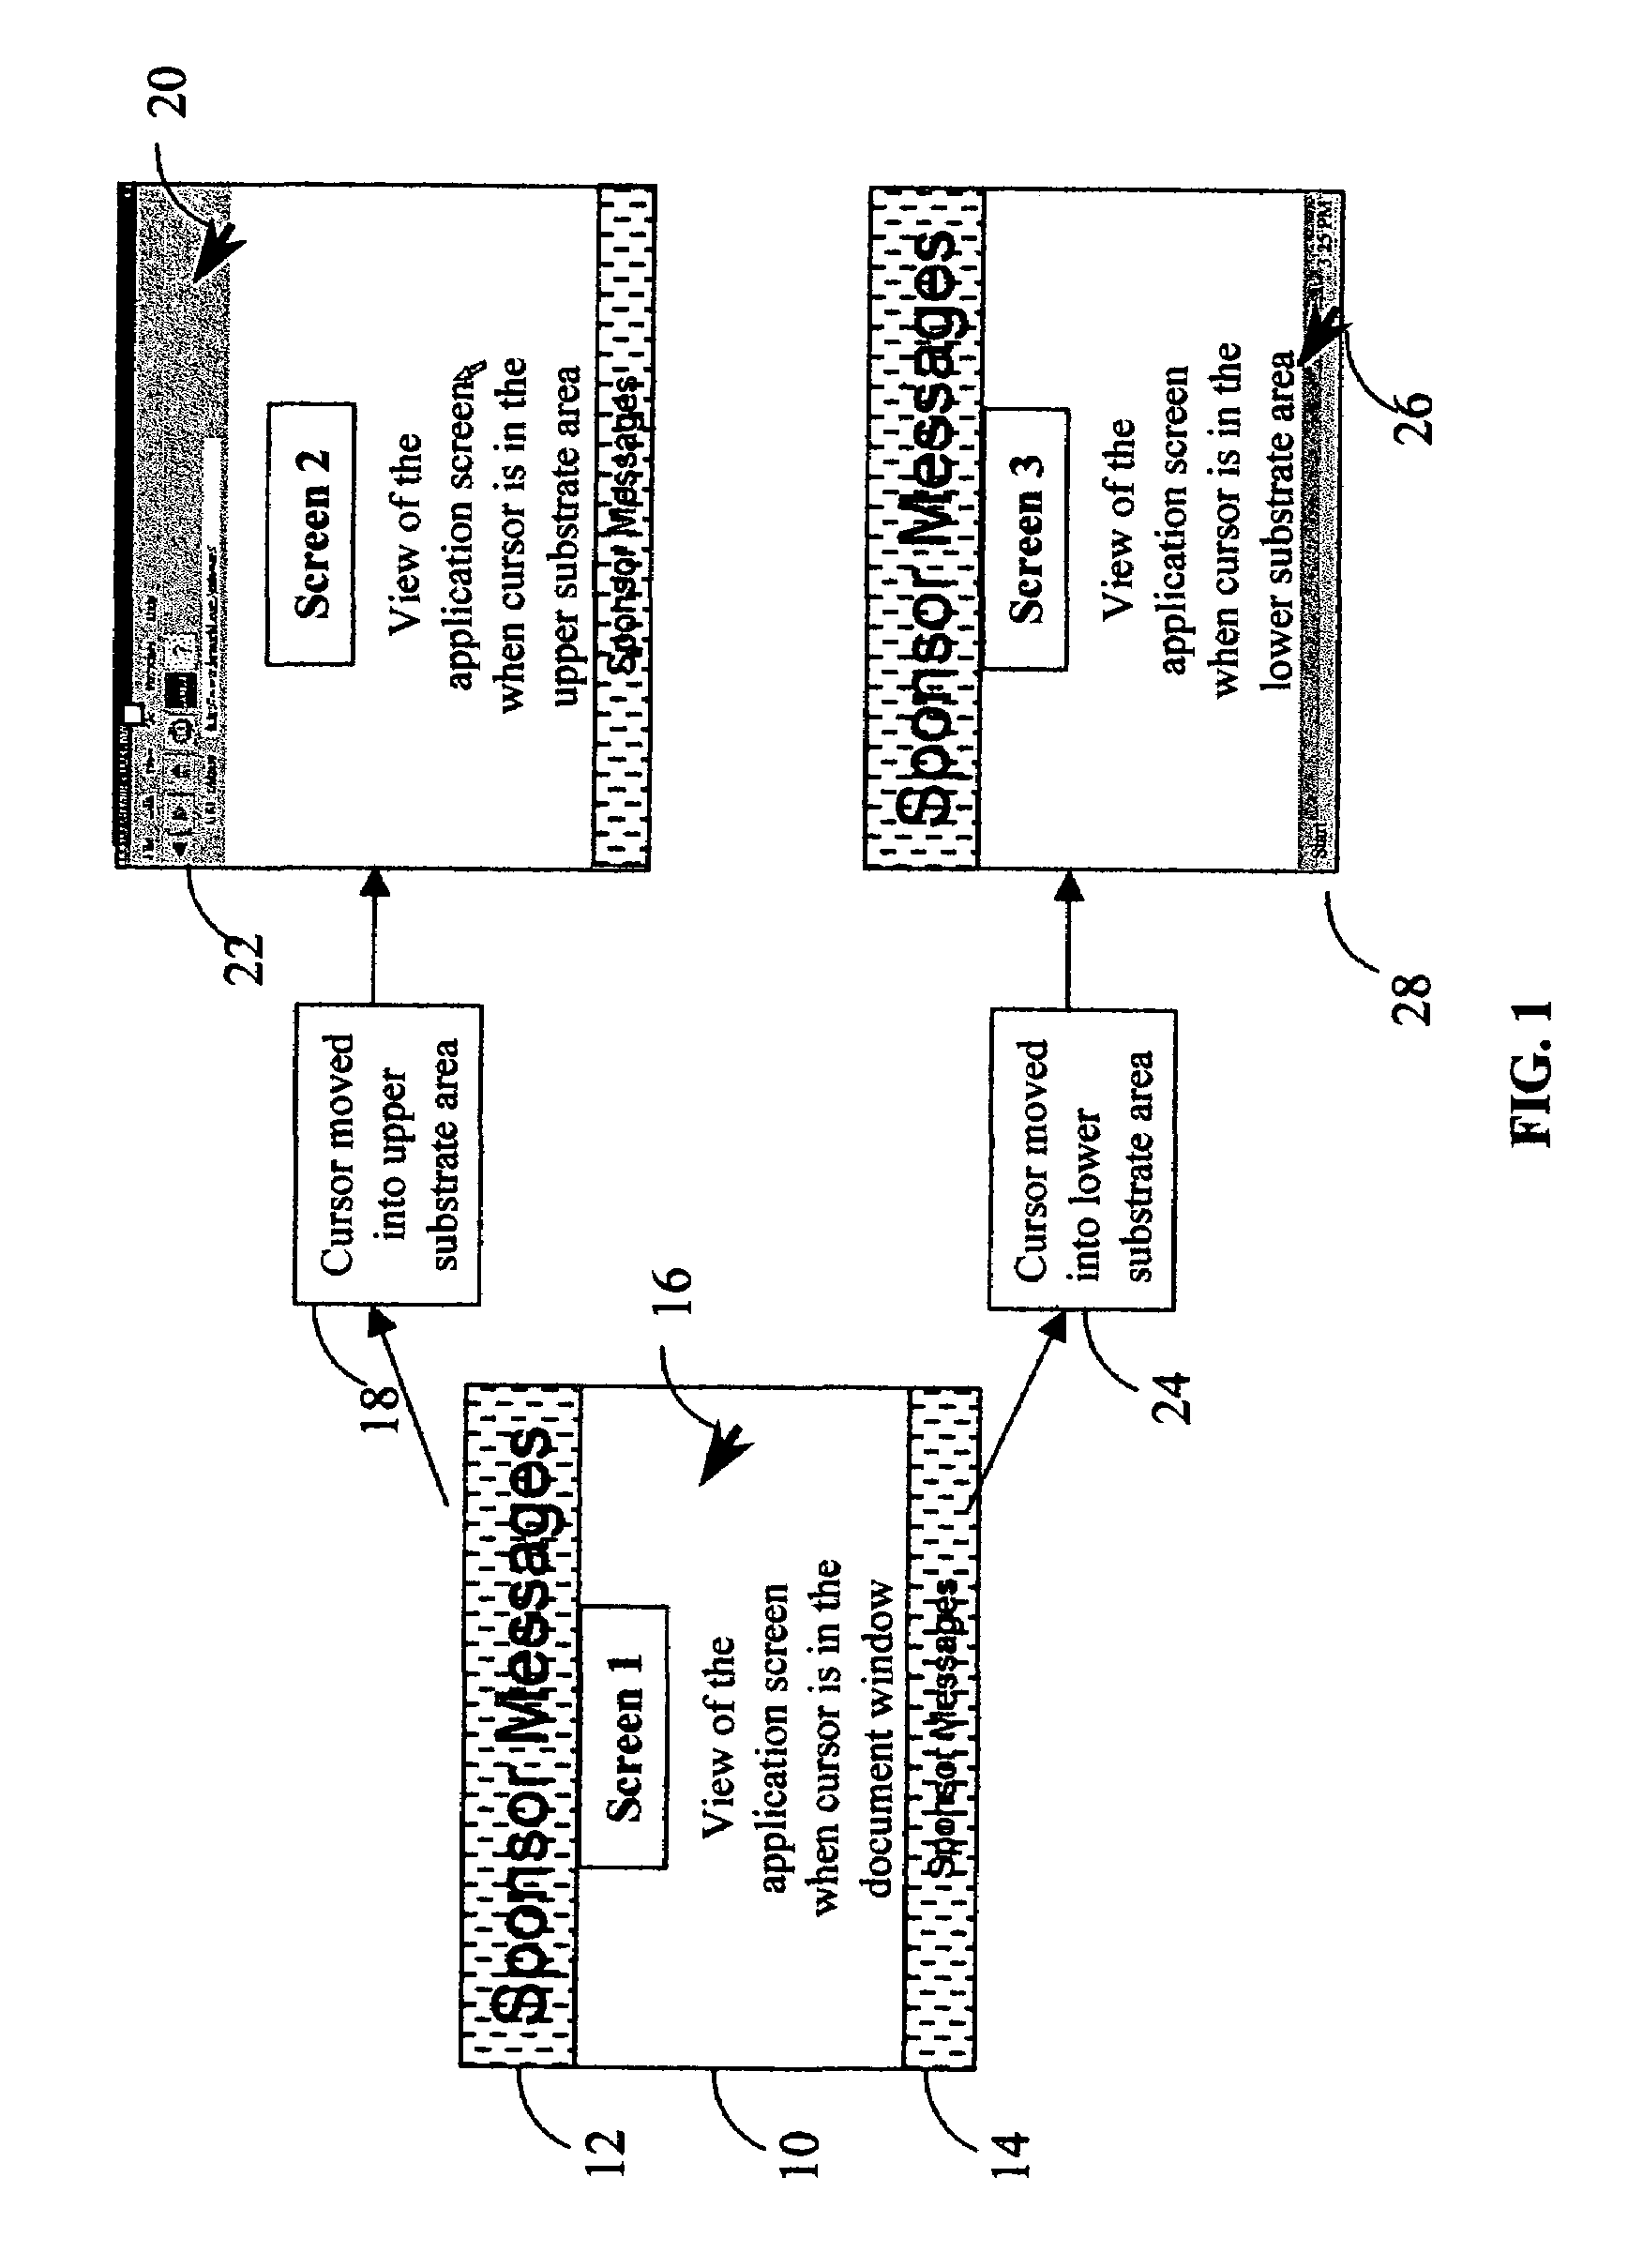 Method and system of creating floating windows for displaying sponsor information, messages or programs in non-obtrusive areas of the graphic user interface of a software application